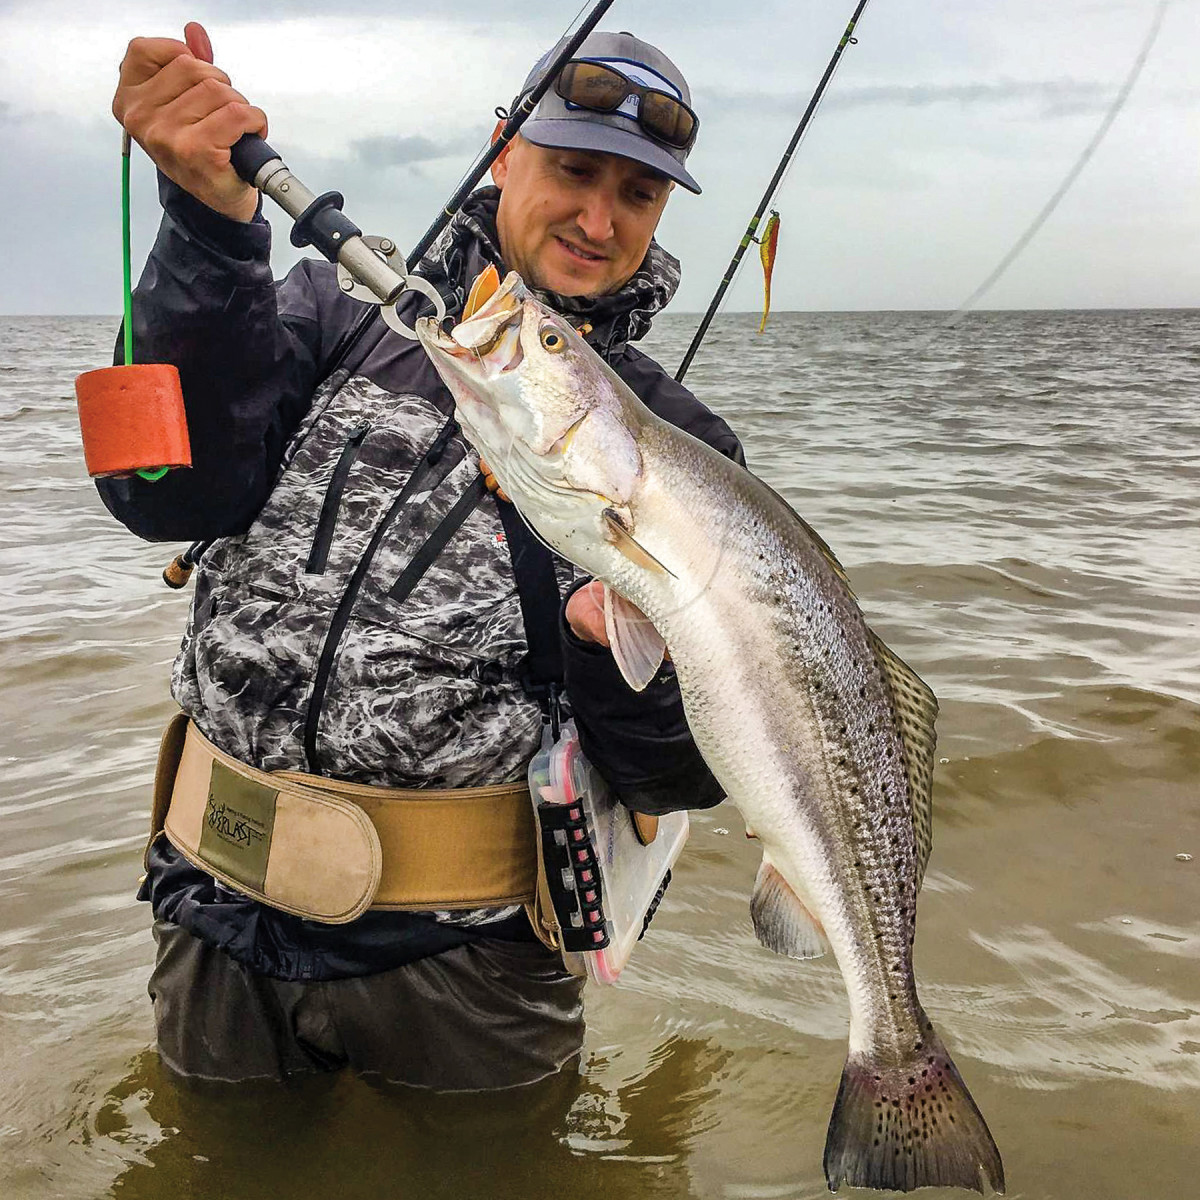 On the Gulf coast, wading for big trout is the preferred method. Photo by Kyle Johnson.